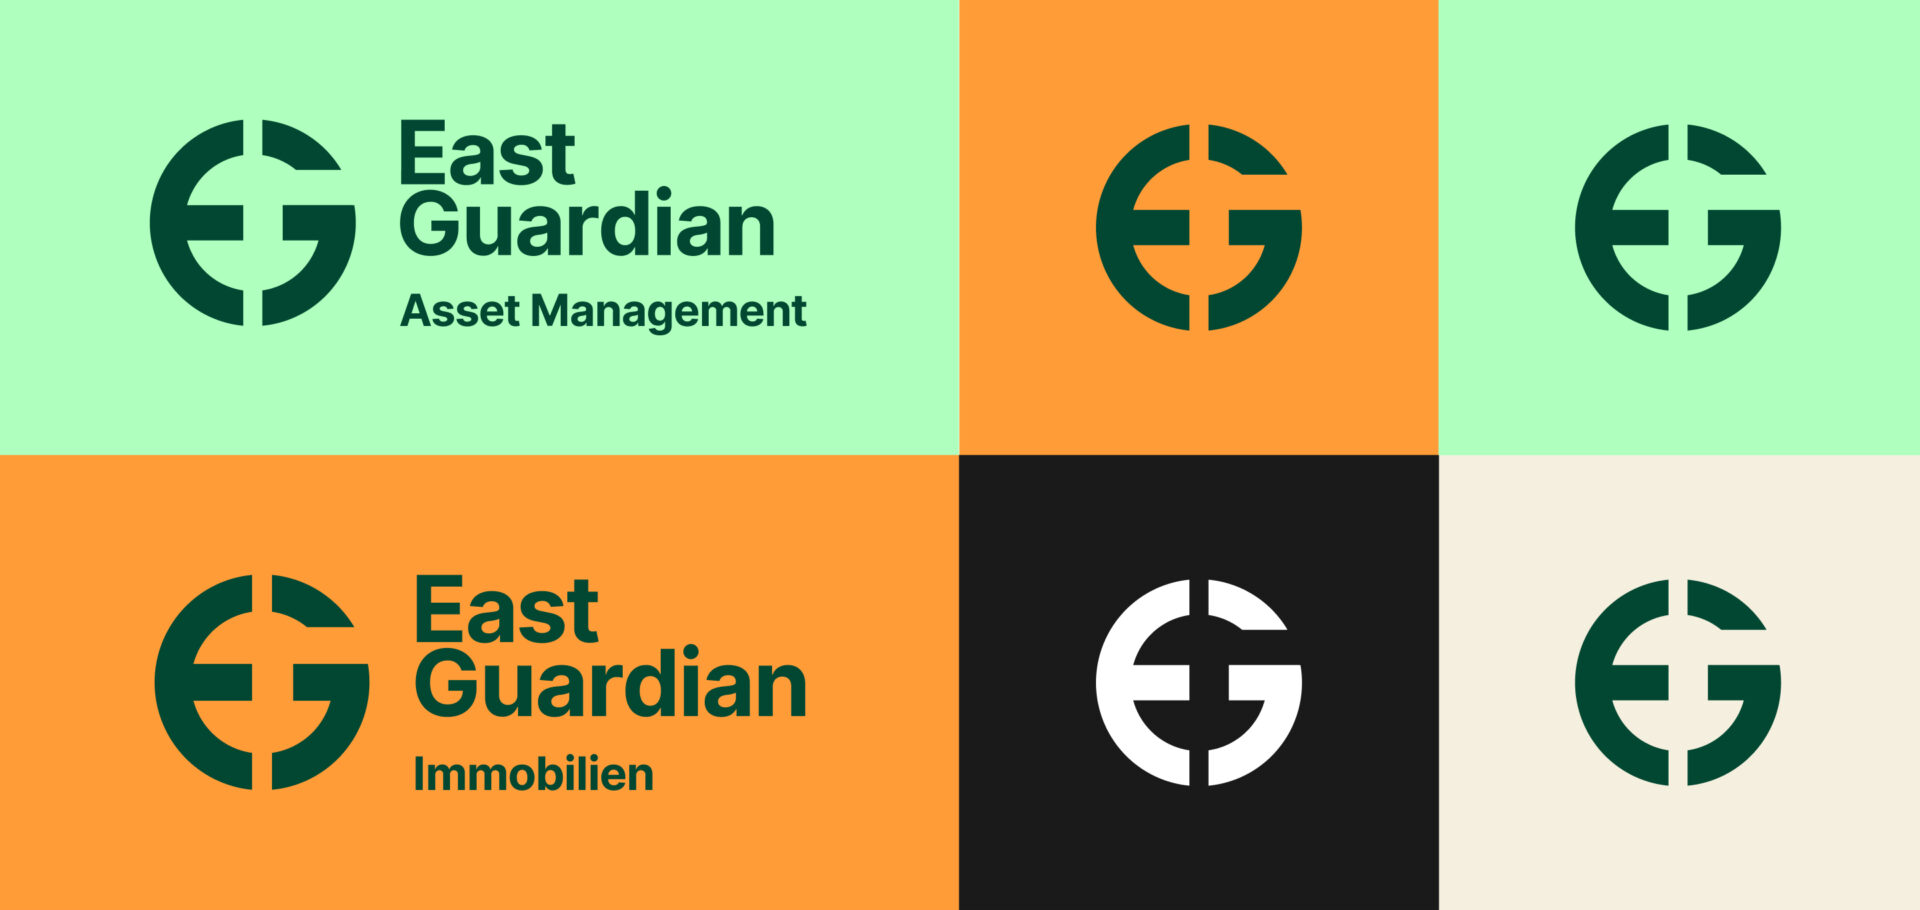 The logos for East Guardian Asset Management and East Guardian Immobilien share the same symbol and font but using different brand colors.